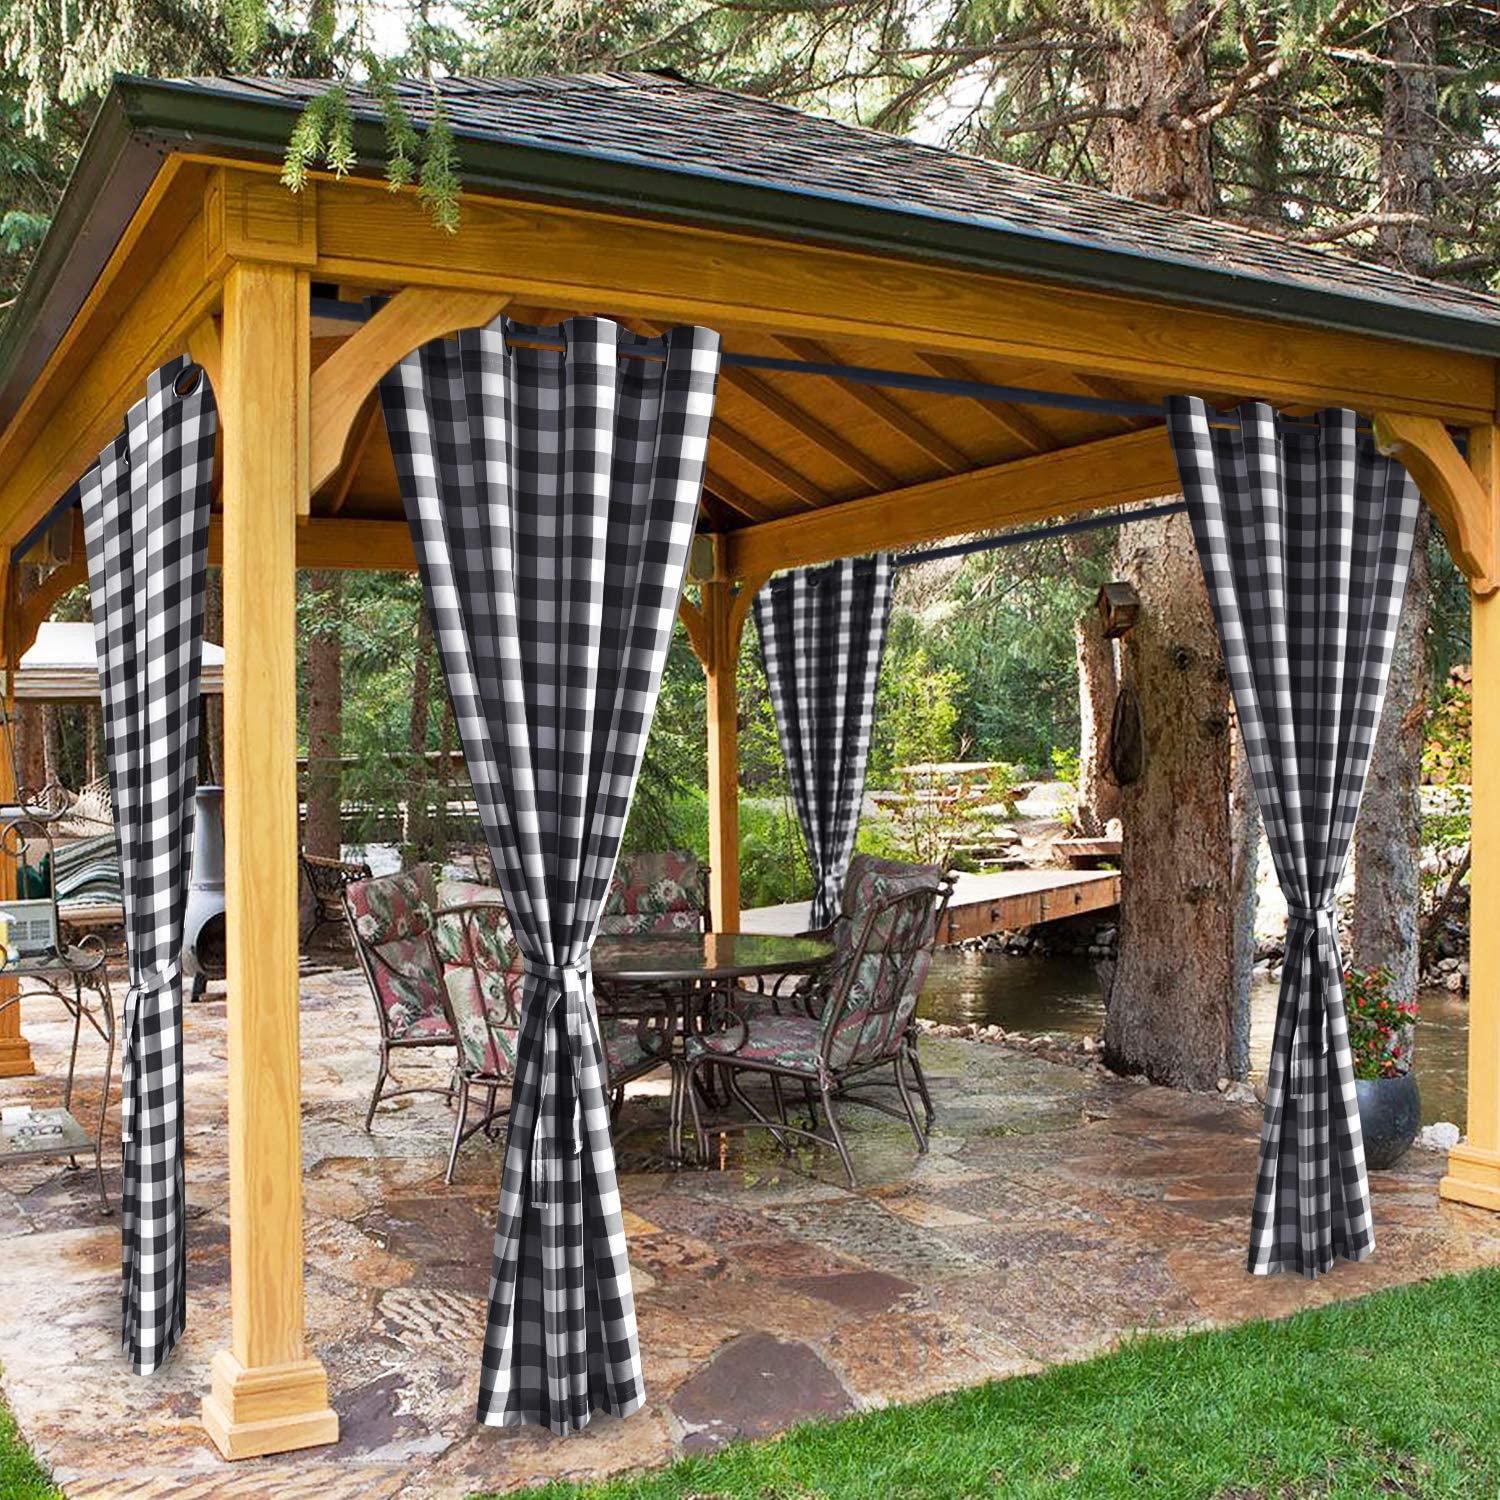 Plaid Outdoor Curtains for Patio Waterproof Grommet Curtains for Gazebo, Porch and Cabana 1 Panel